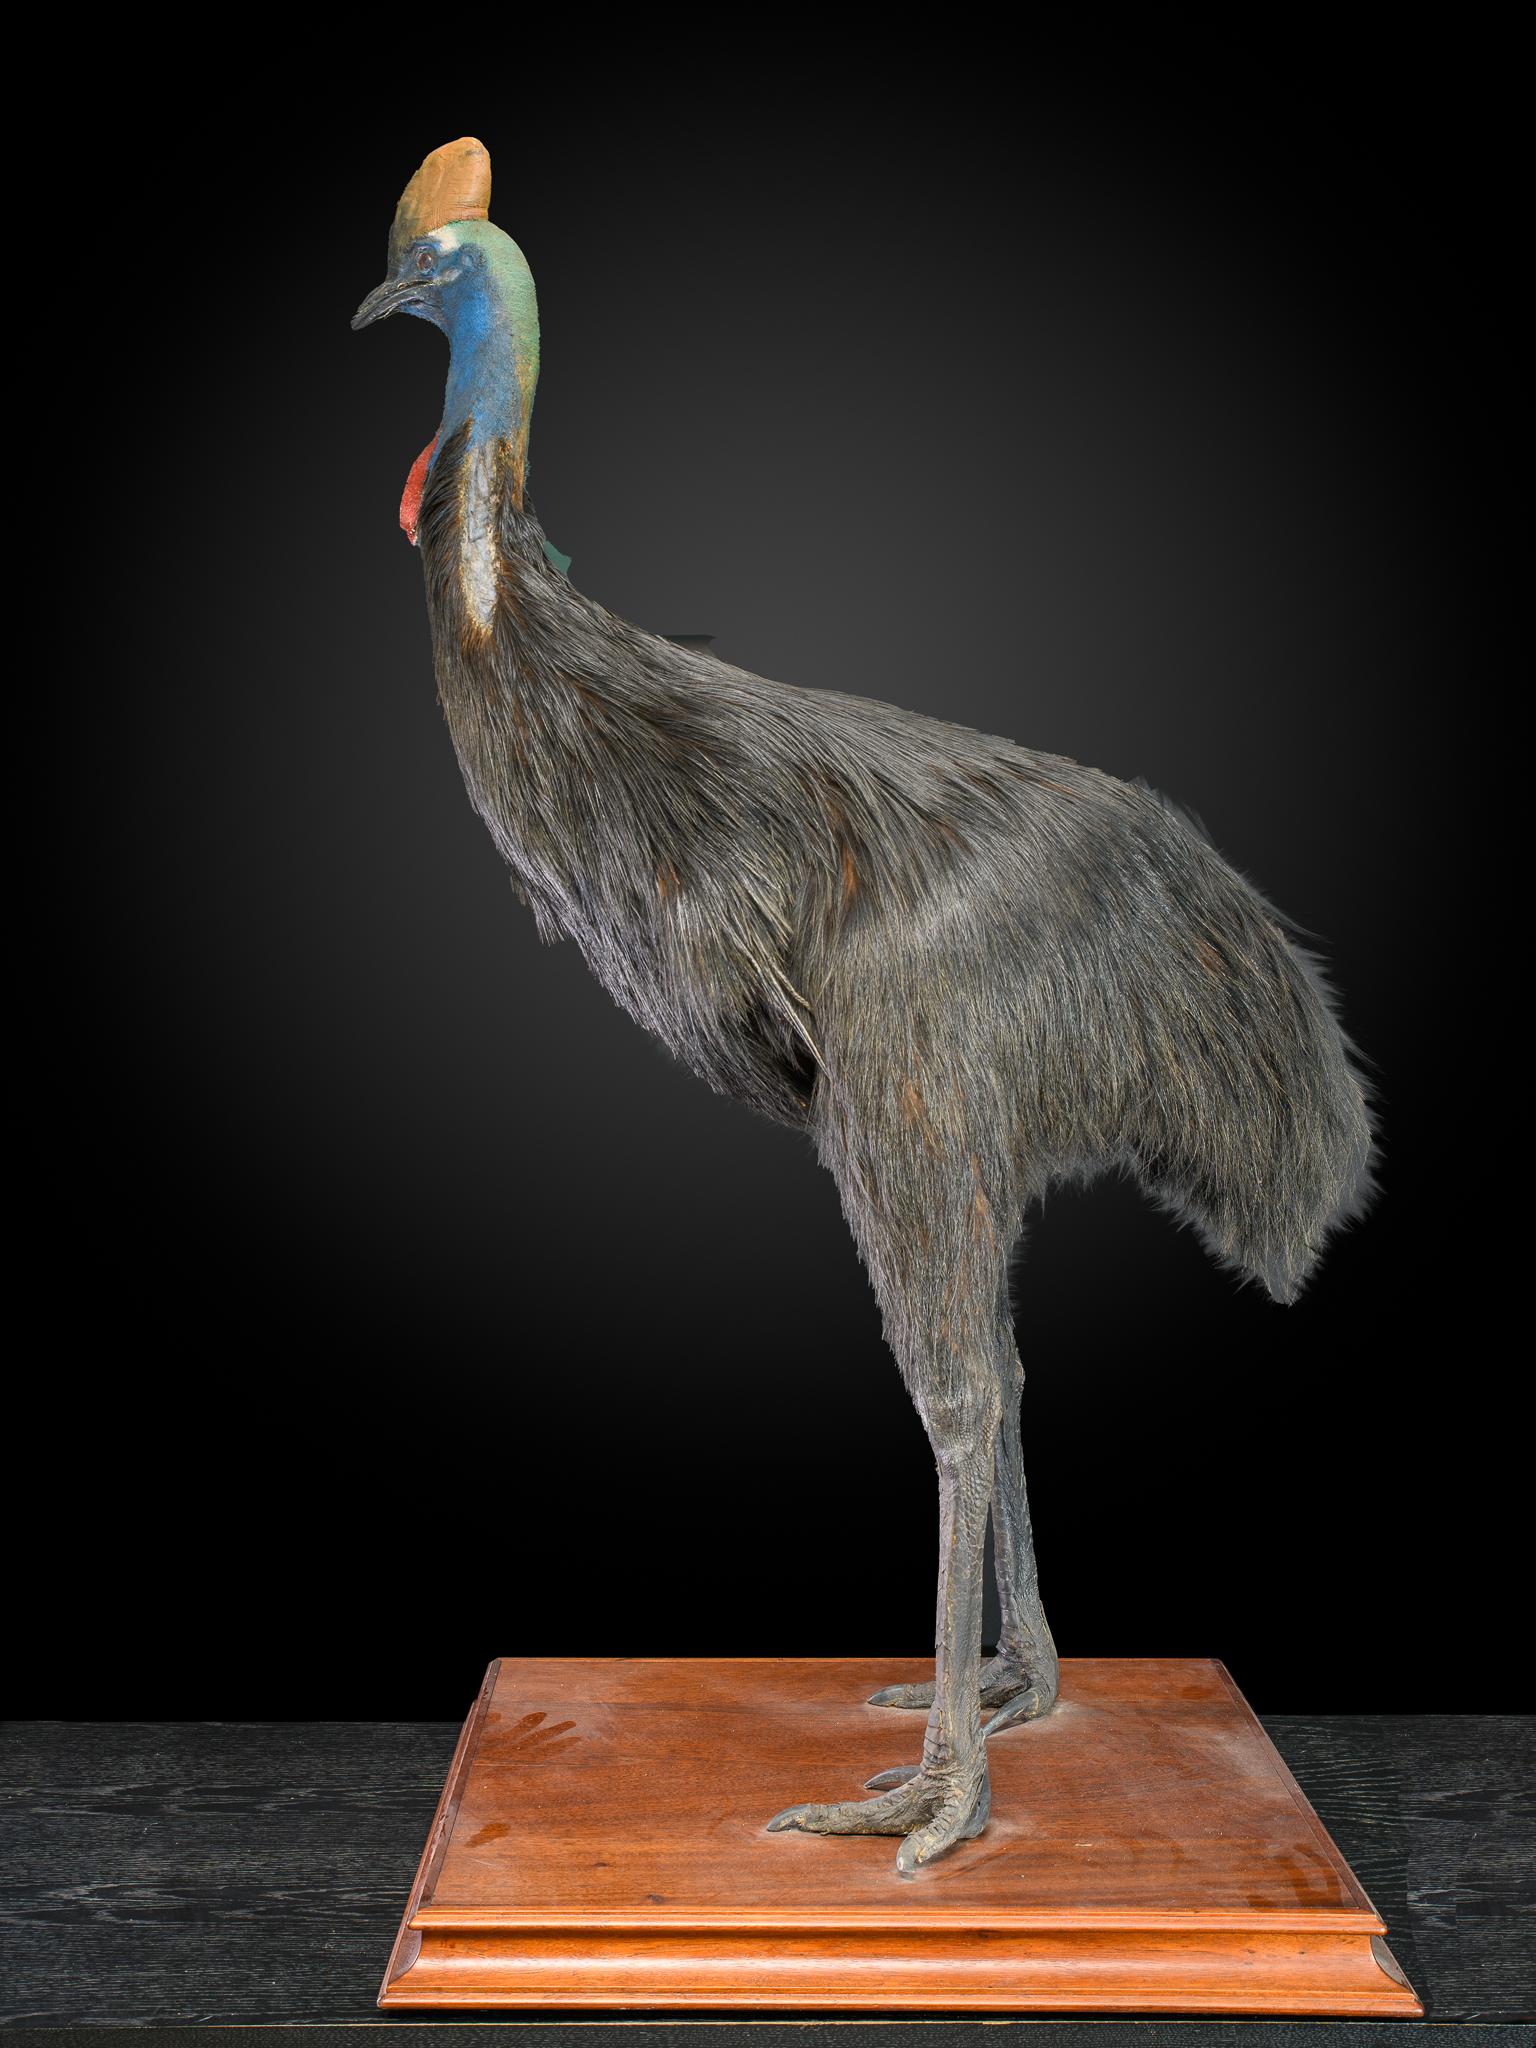 Mounted on an oak square base with wheels, feathers in good condition, vintage colors and for the species recognizable bald feathers on intact wings.